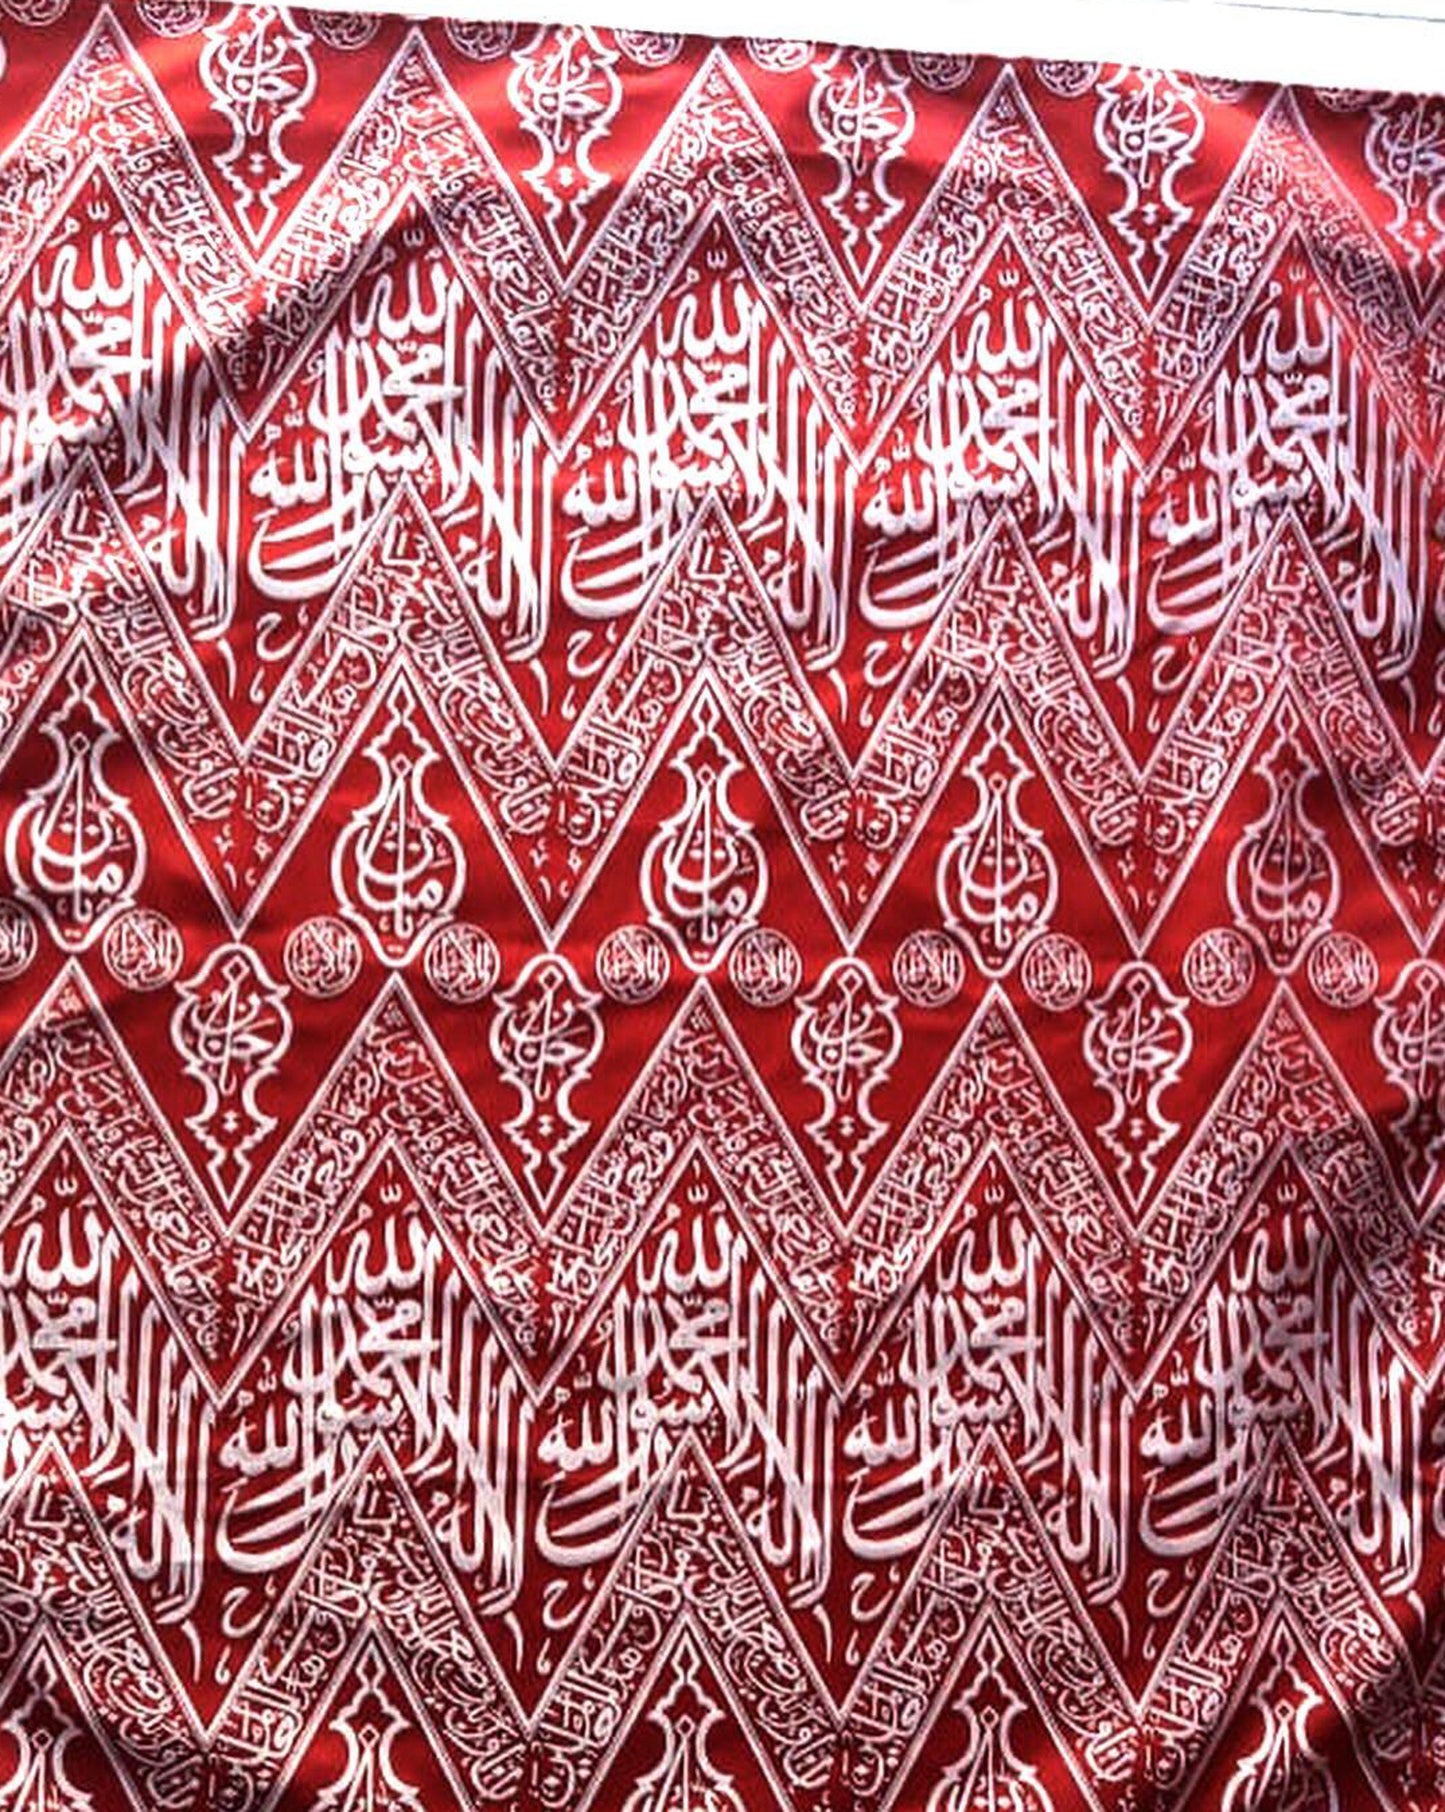 Holy Kaaba Red Covering Cloth / Precous Unique Gift Idea For Muslim Family and Friend, 100 cm x 55 cm